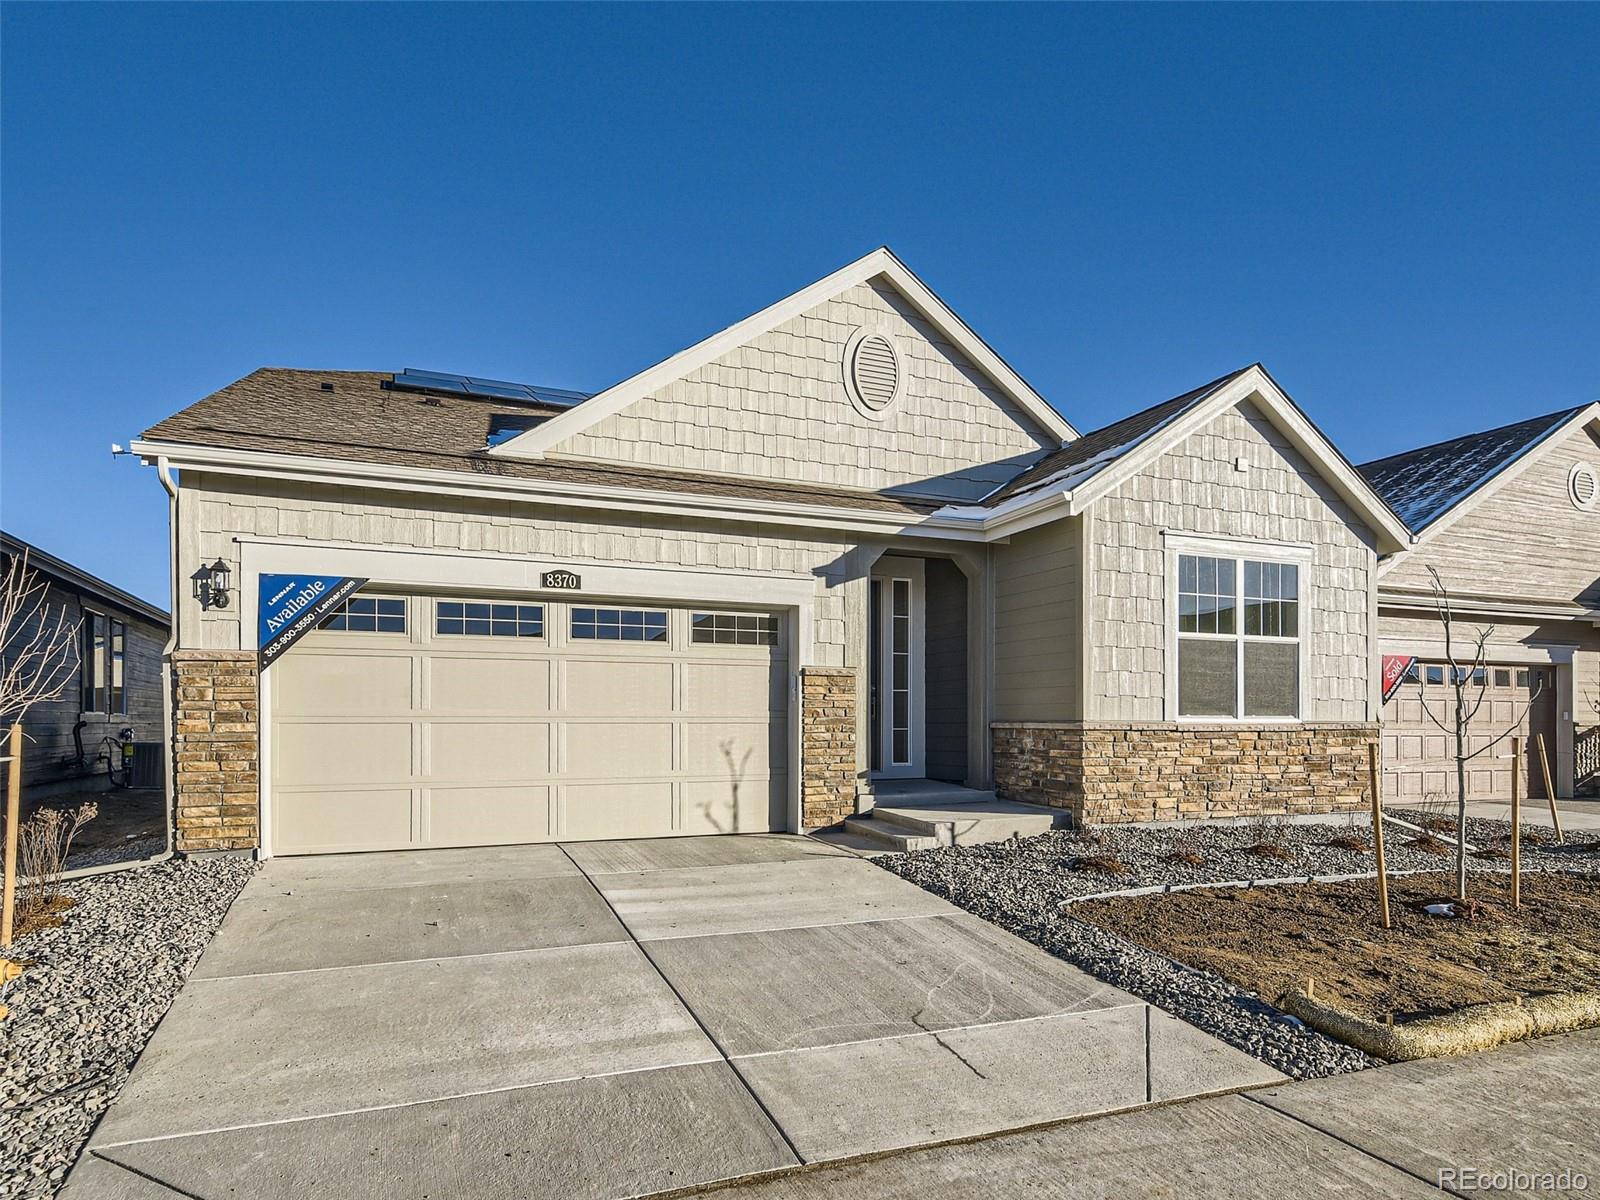 8370 s cody way, Littleton sold home. Closed on 2024-02-13 for $700,000.